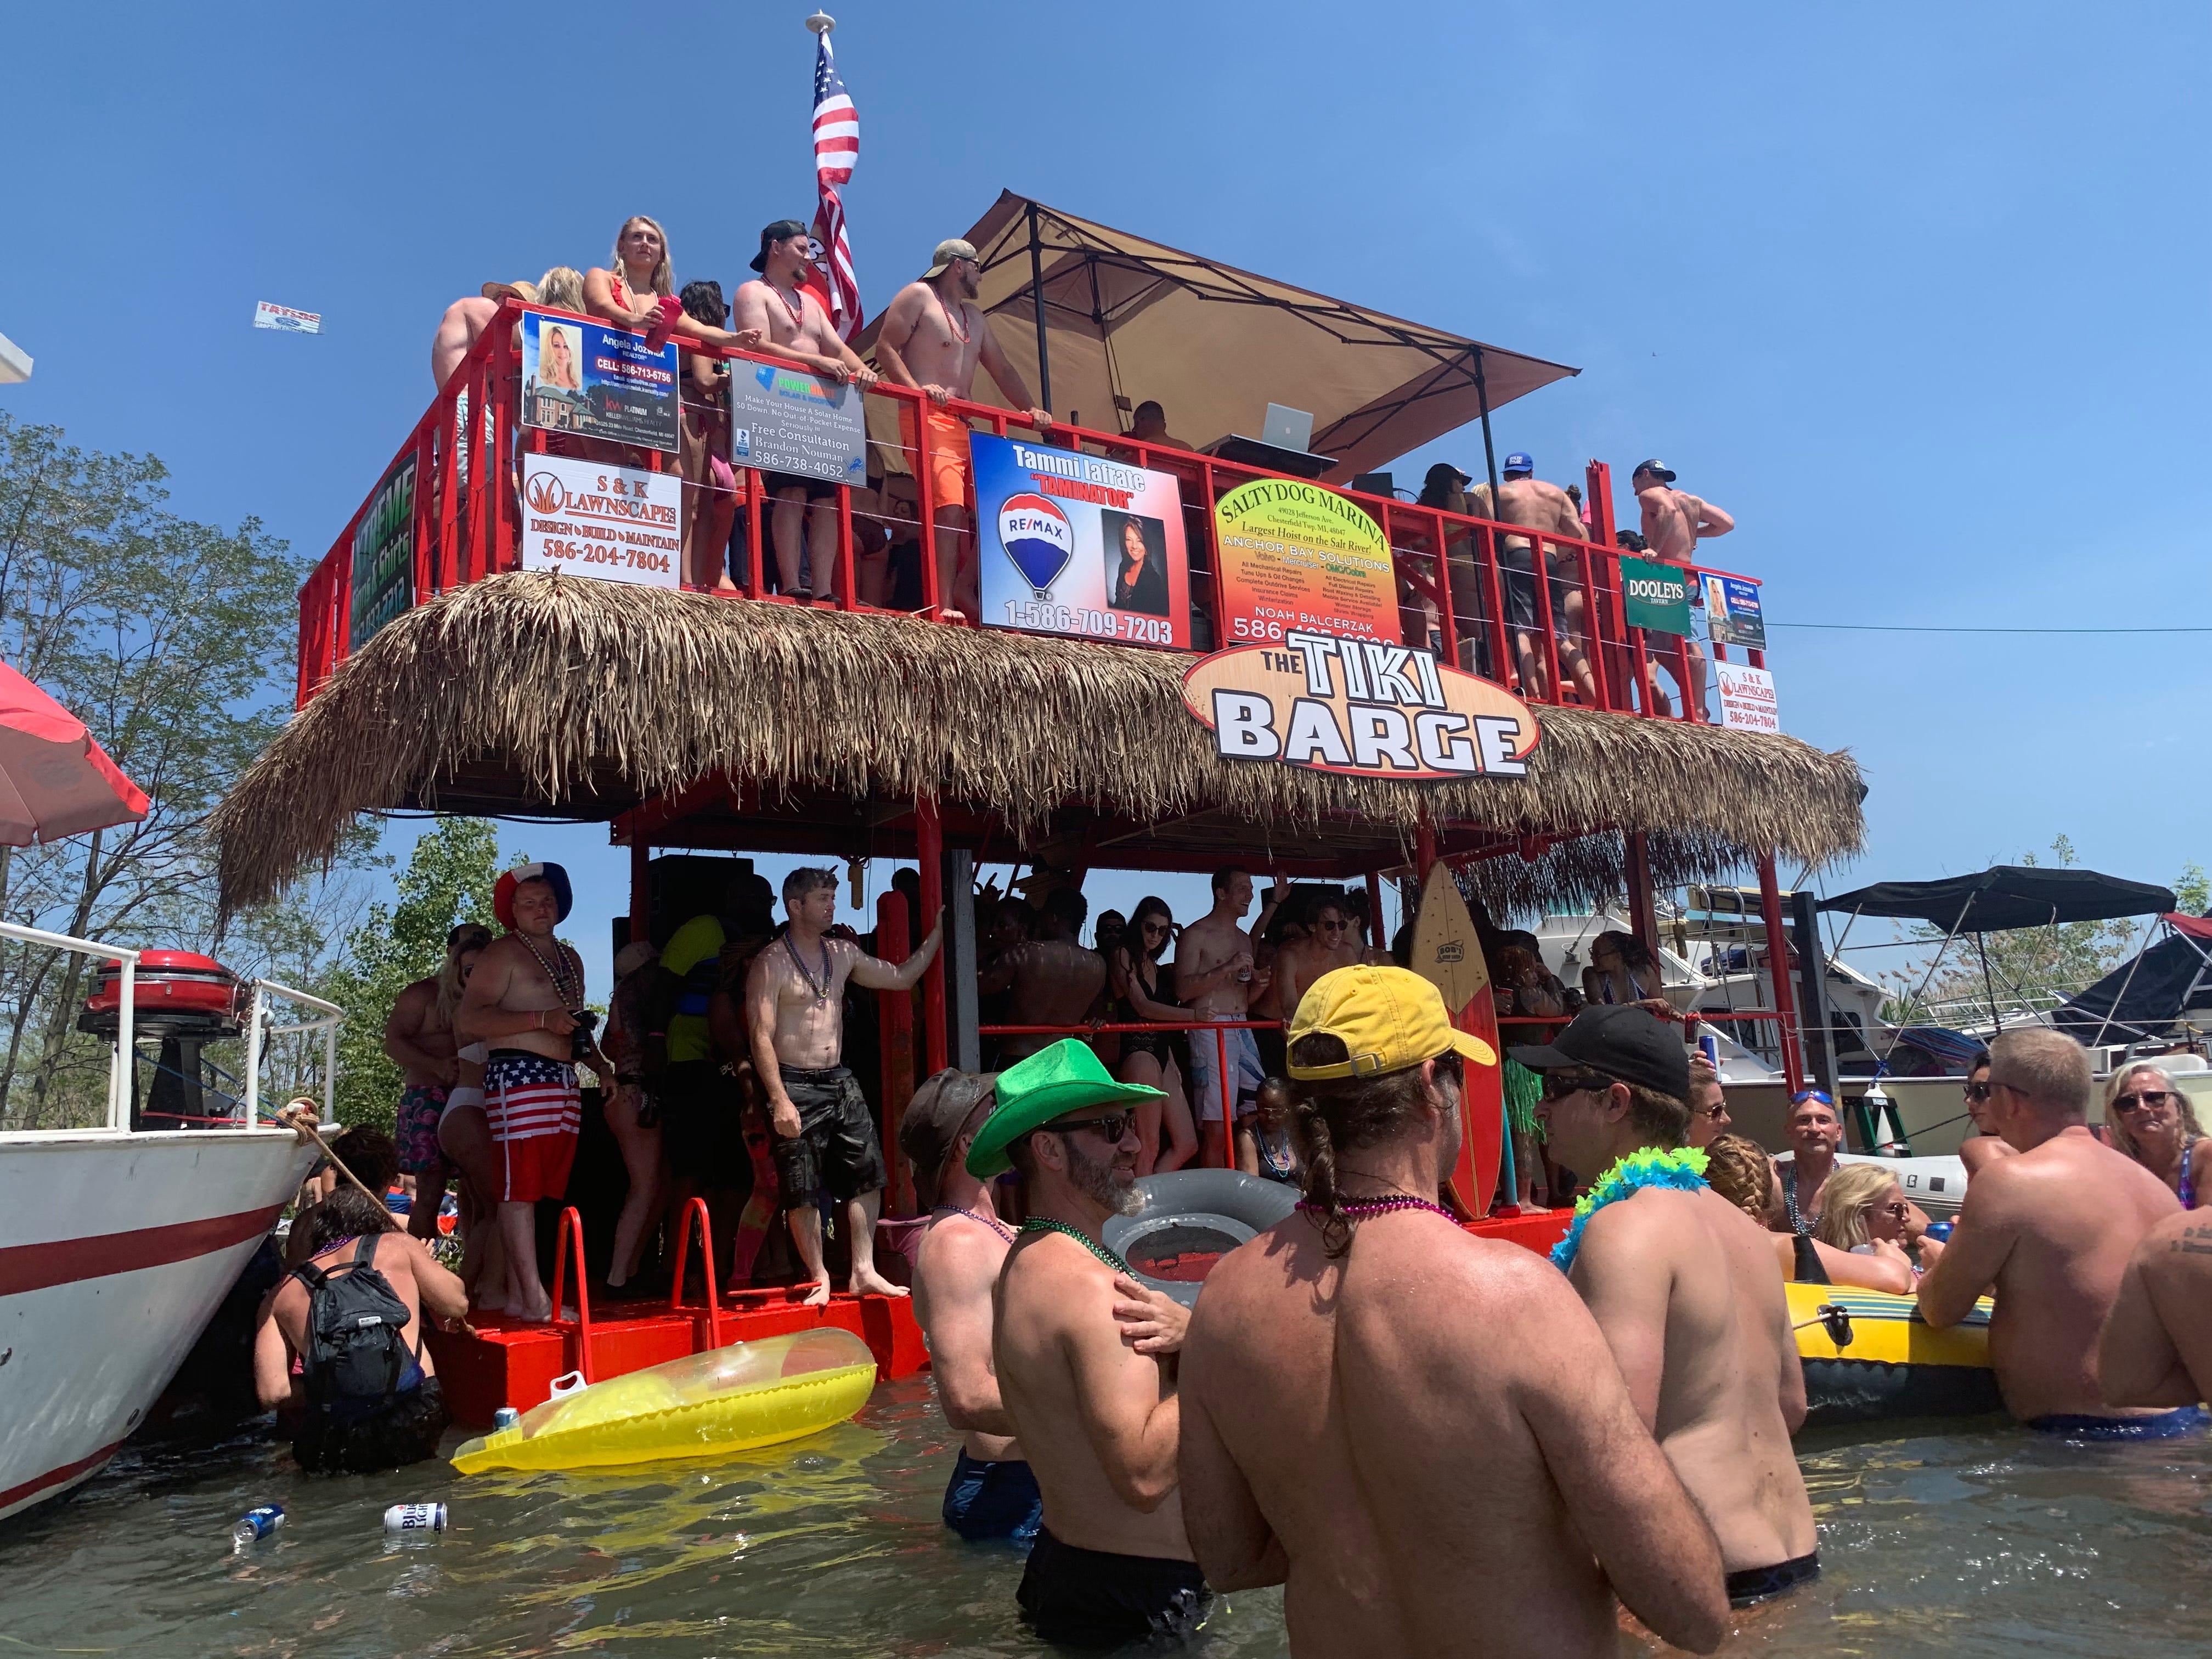 Jobbie Nooner revelers congregate in waist-high waters surrounding the Tiki Barge party boat on what was a beach area in previous years... eliminated this year by high lake water levels on Lake St. Clair at Gull Island.